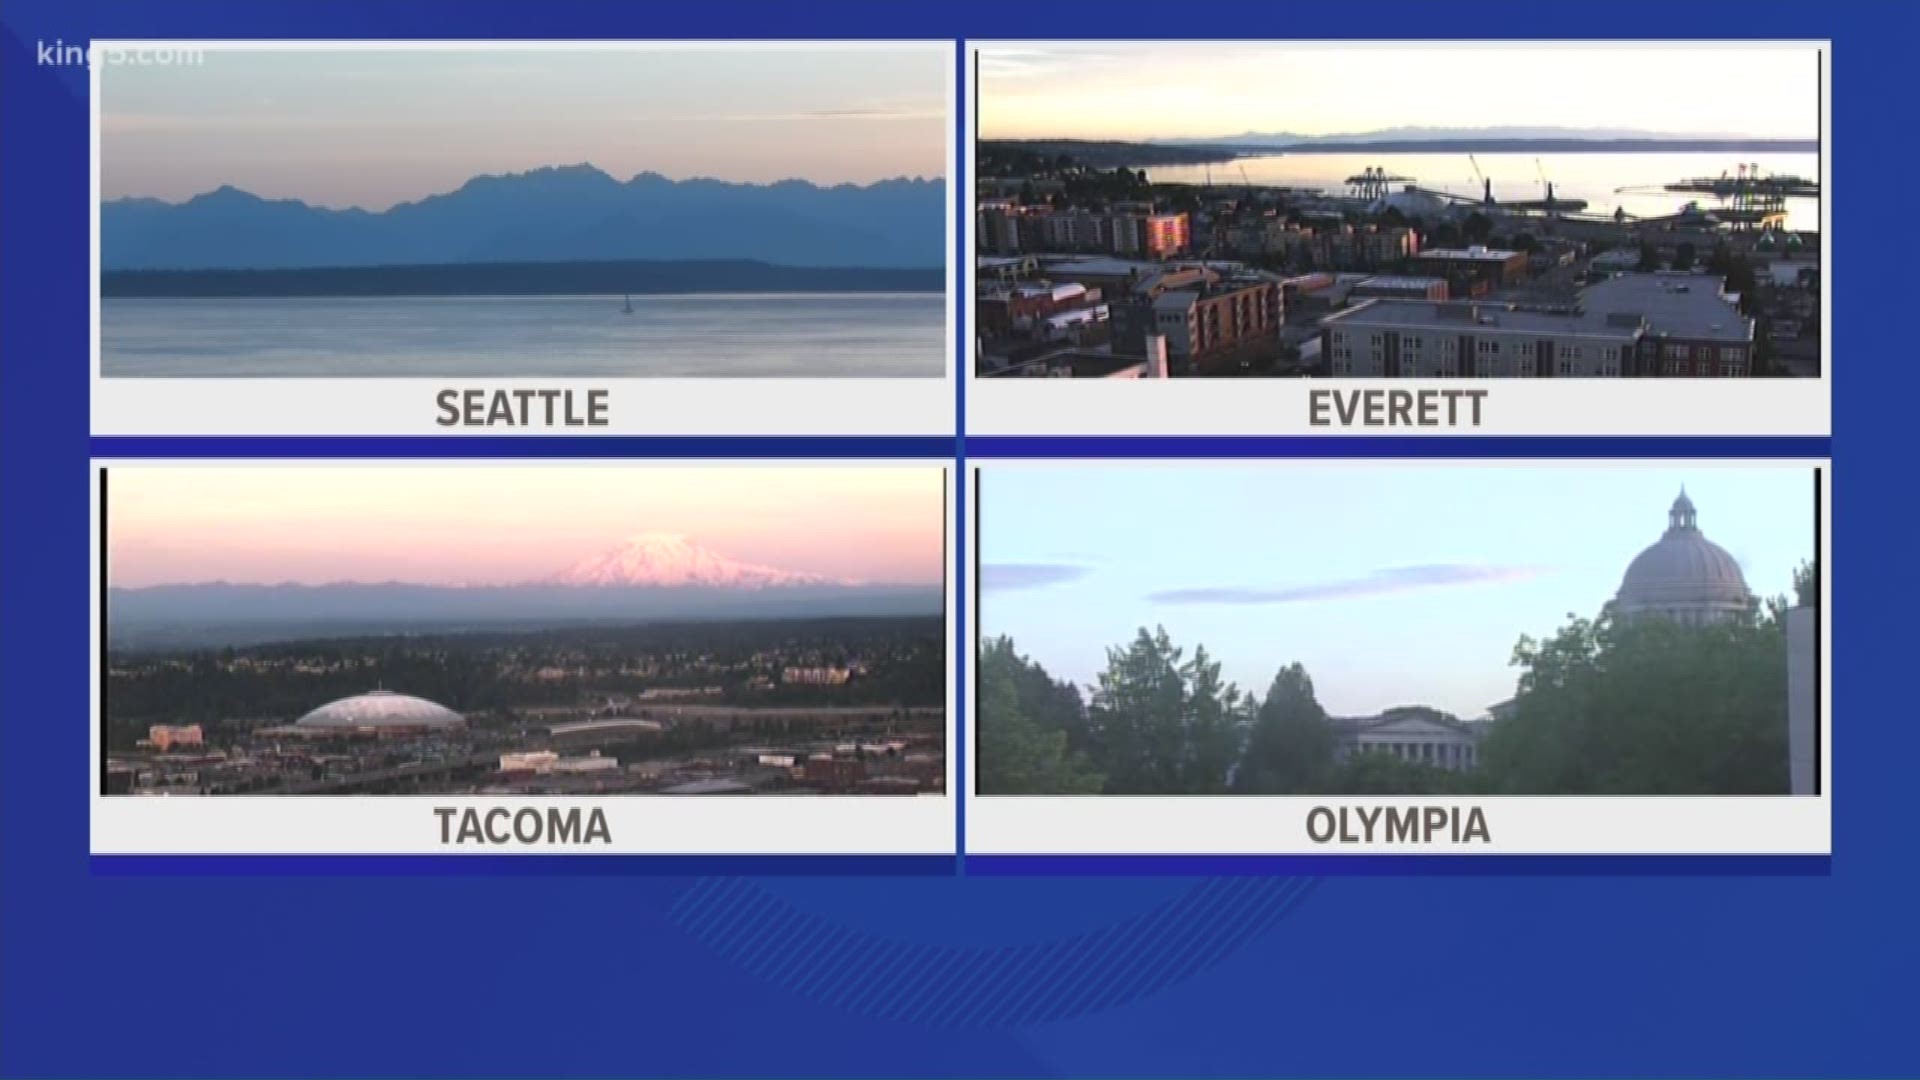 Western Washington cooling down after record heat.